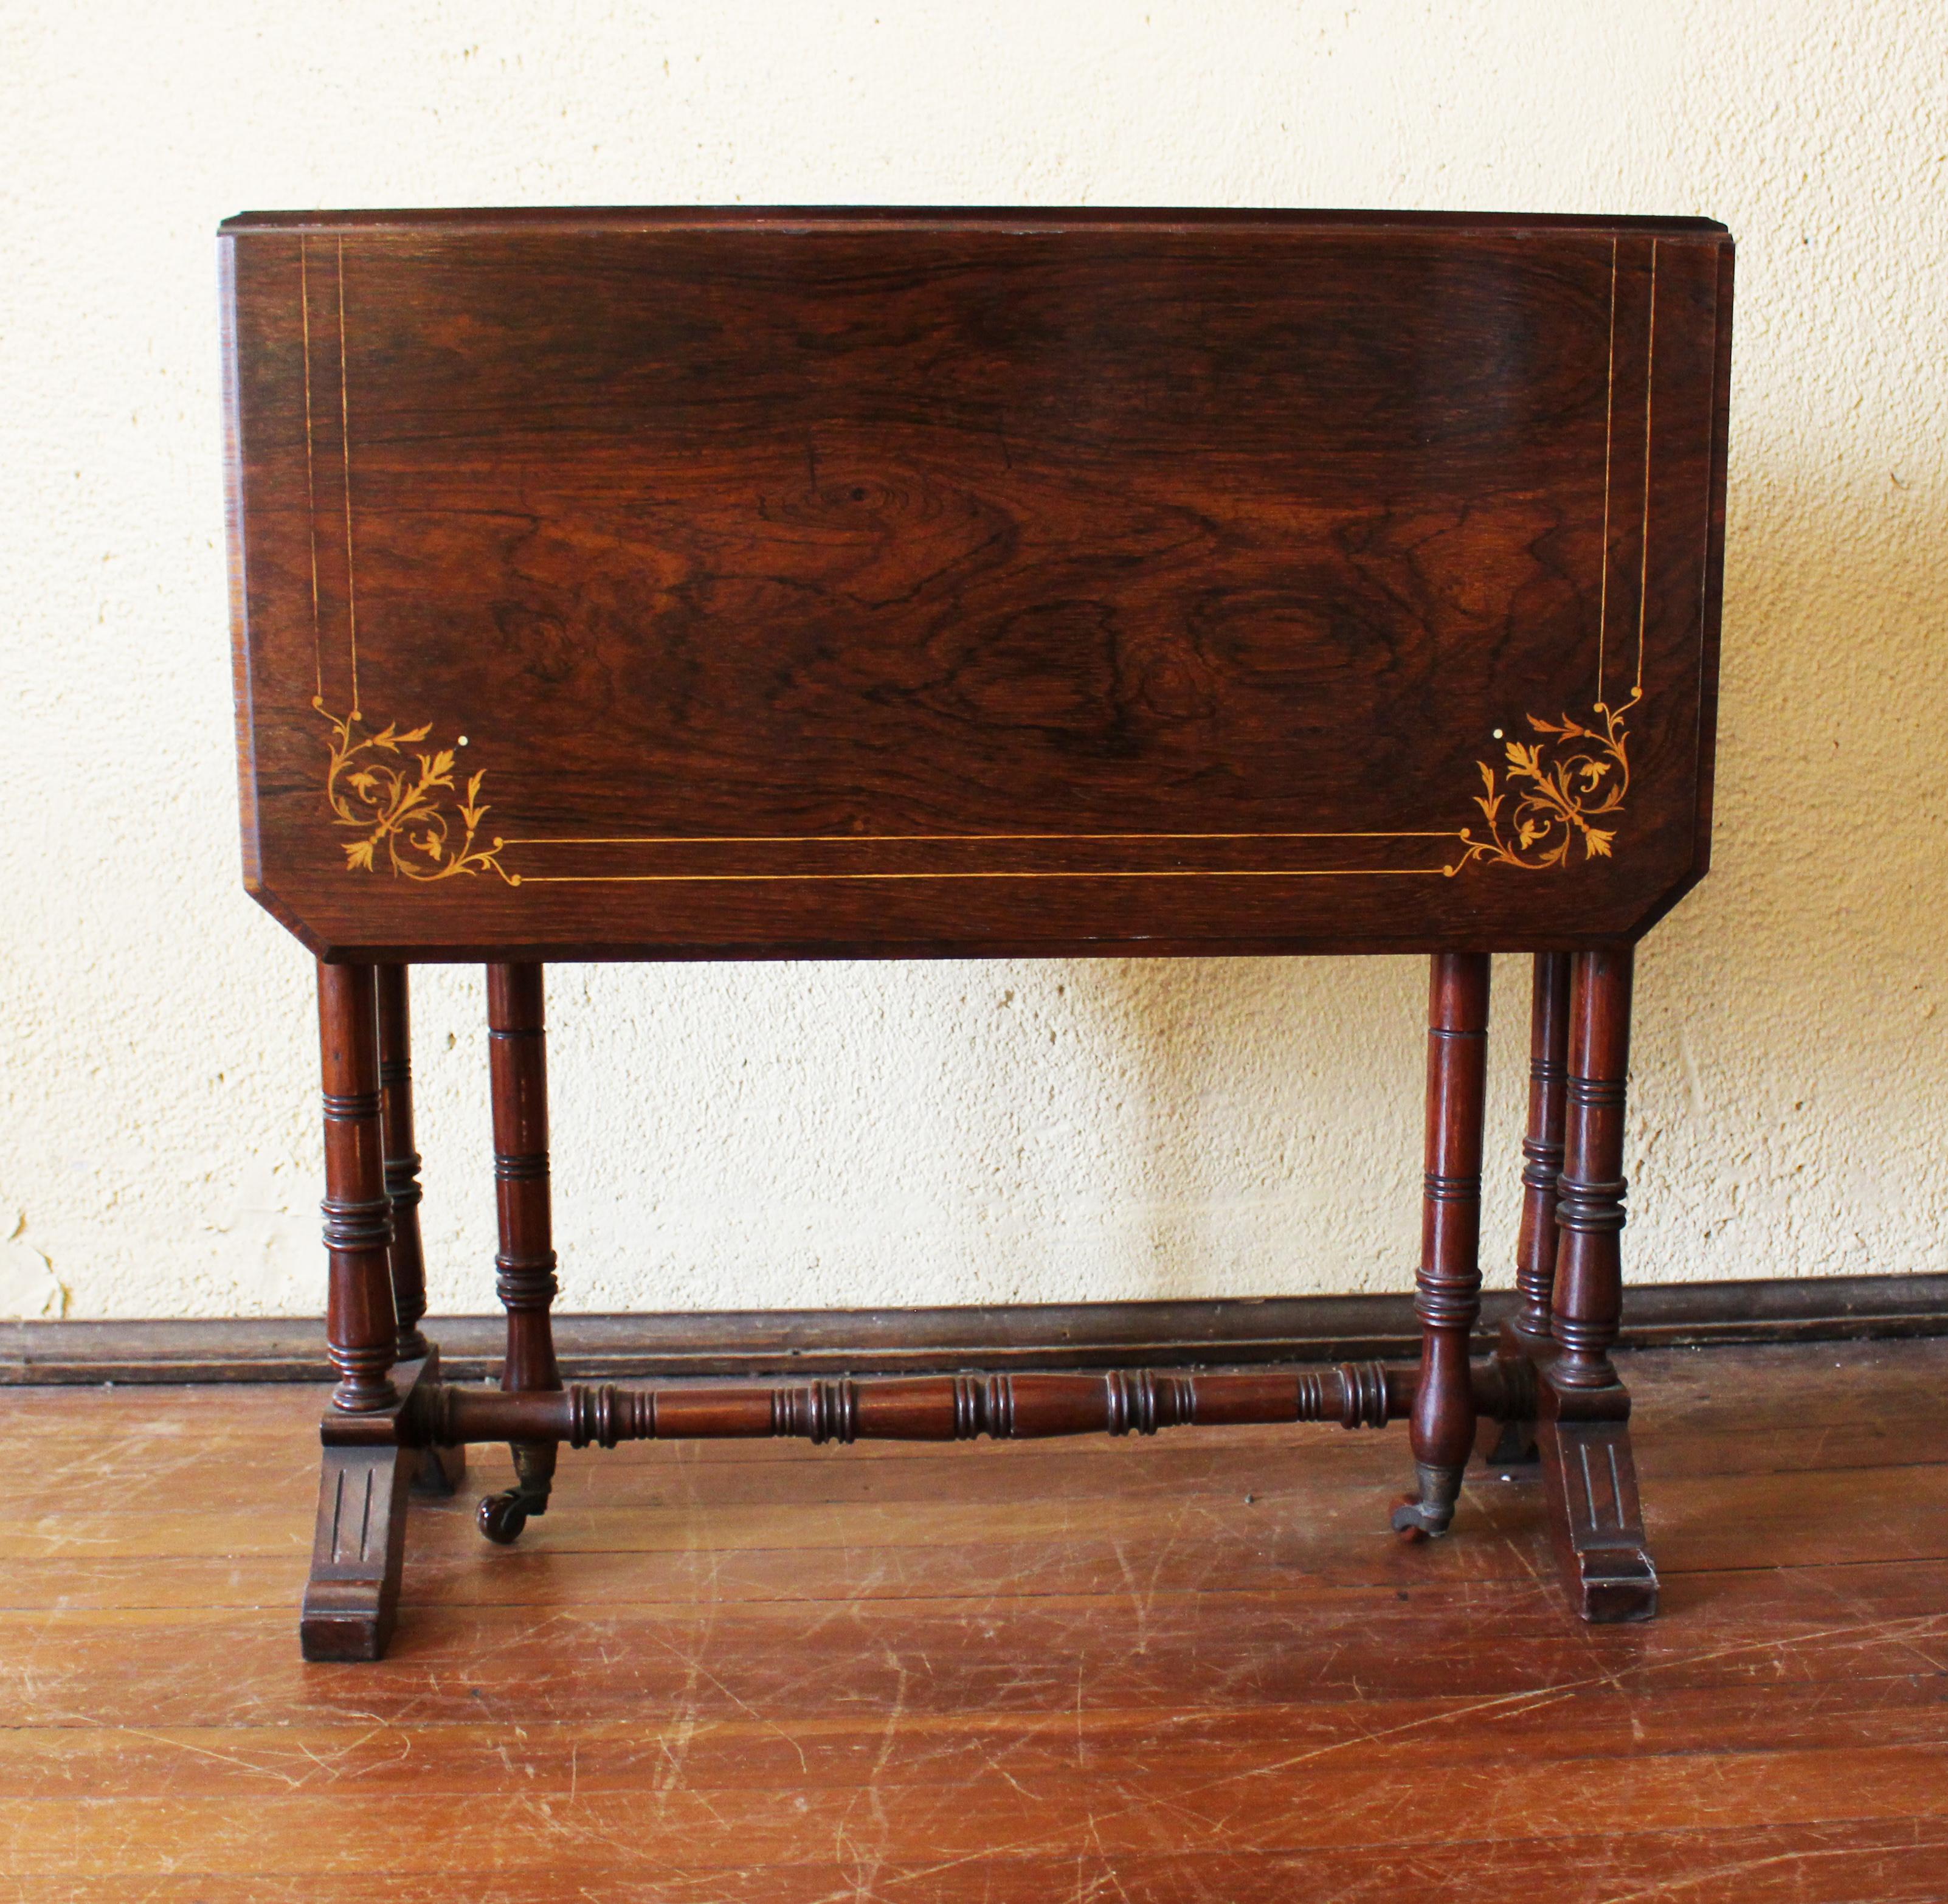 Late 19th century Sutherland table, or drop side table, English. Well figured rosewood with boxwood stringing and naturalistic motif central medallion and corners. Molded edges with canted corners. Well turned and ring carved supports and stretcher.